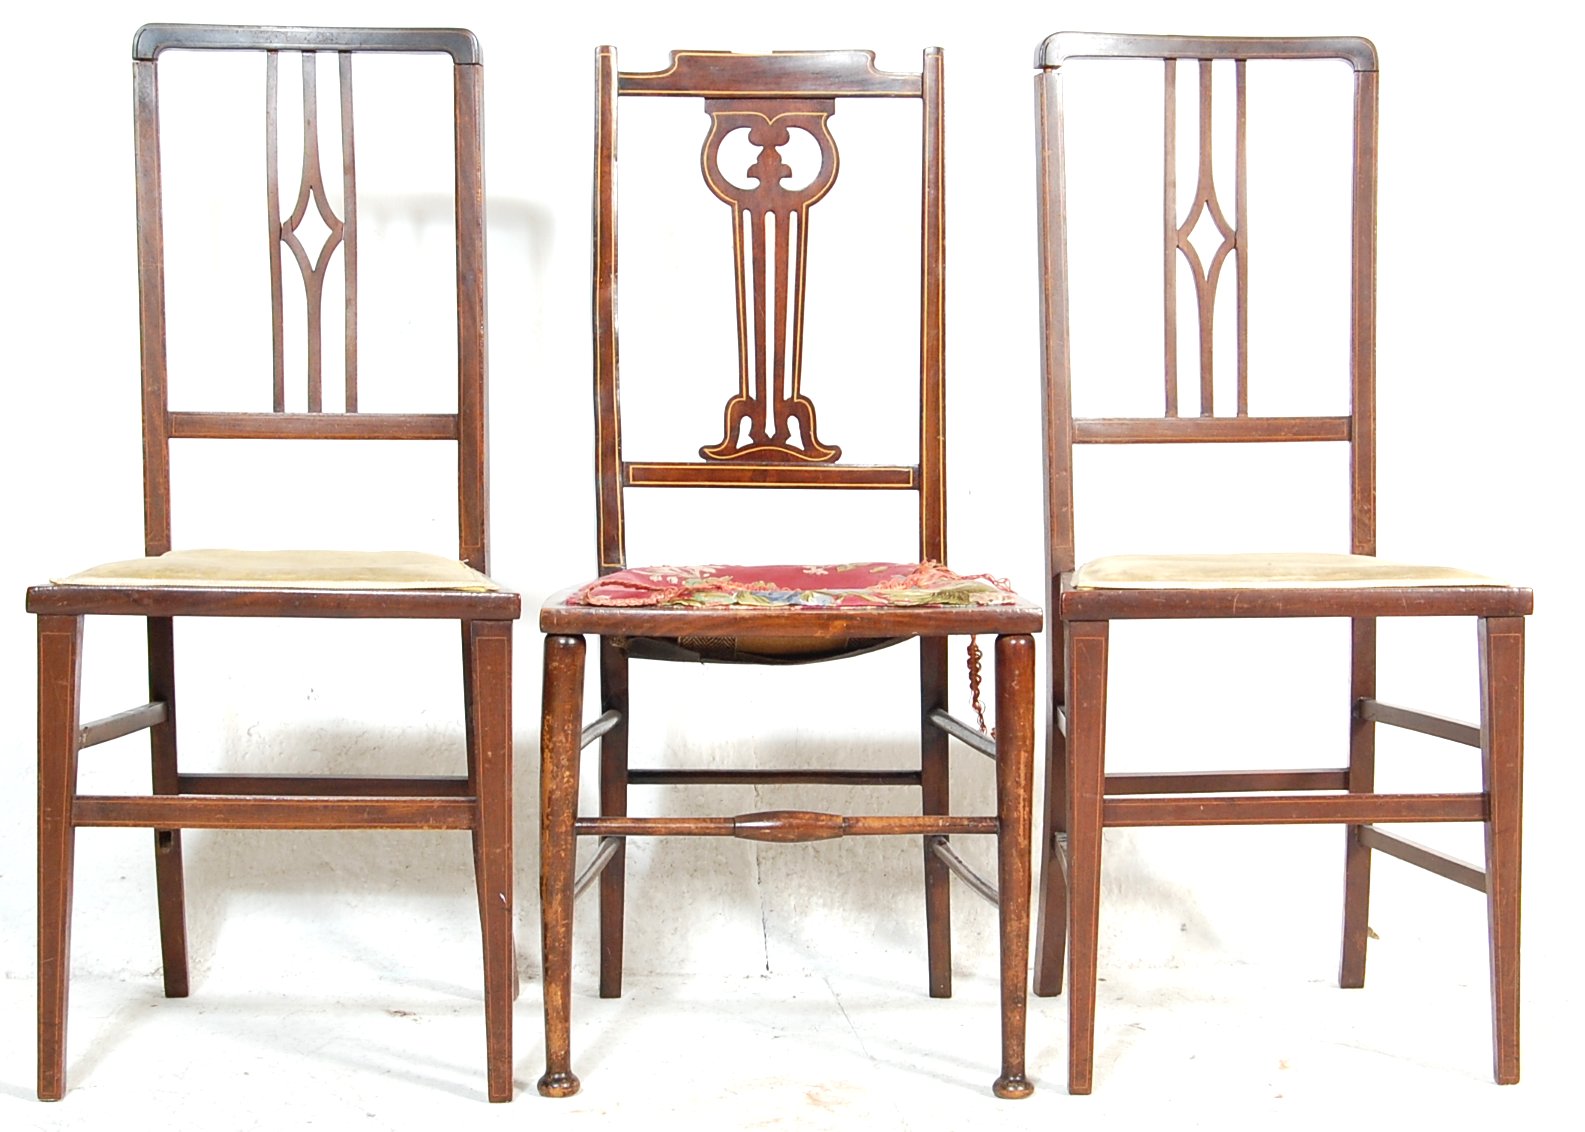 THREE EARLY 20TH CENTURY EDWARDIAN BEDROOM CHAIRS. - Image 2 of 4